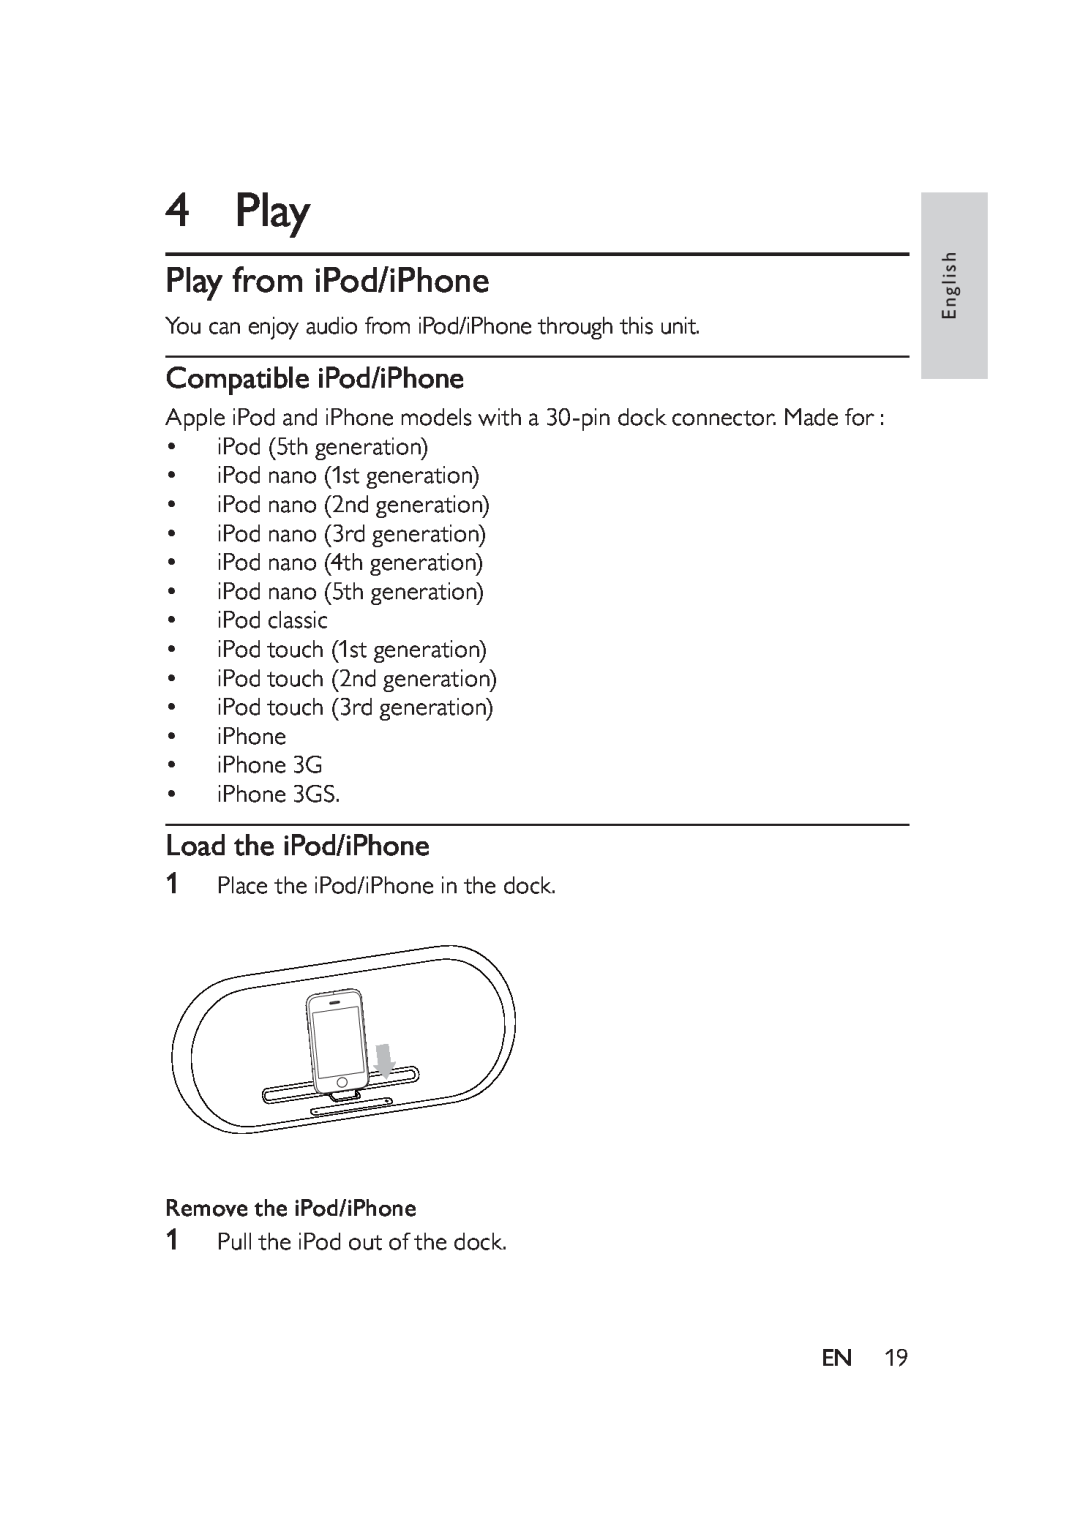 Philips DS8550 user manual Play from iPod/iPhone, Compatible iPod/iPhone, Load the iPod/iPhone 